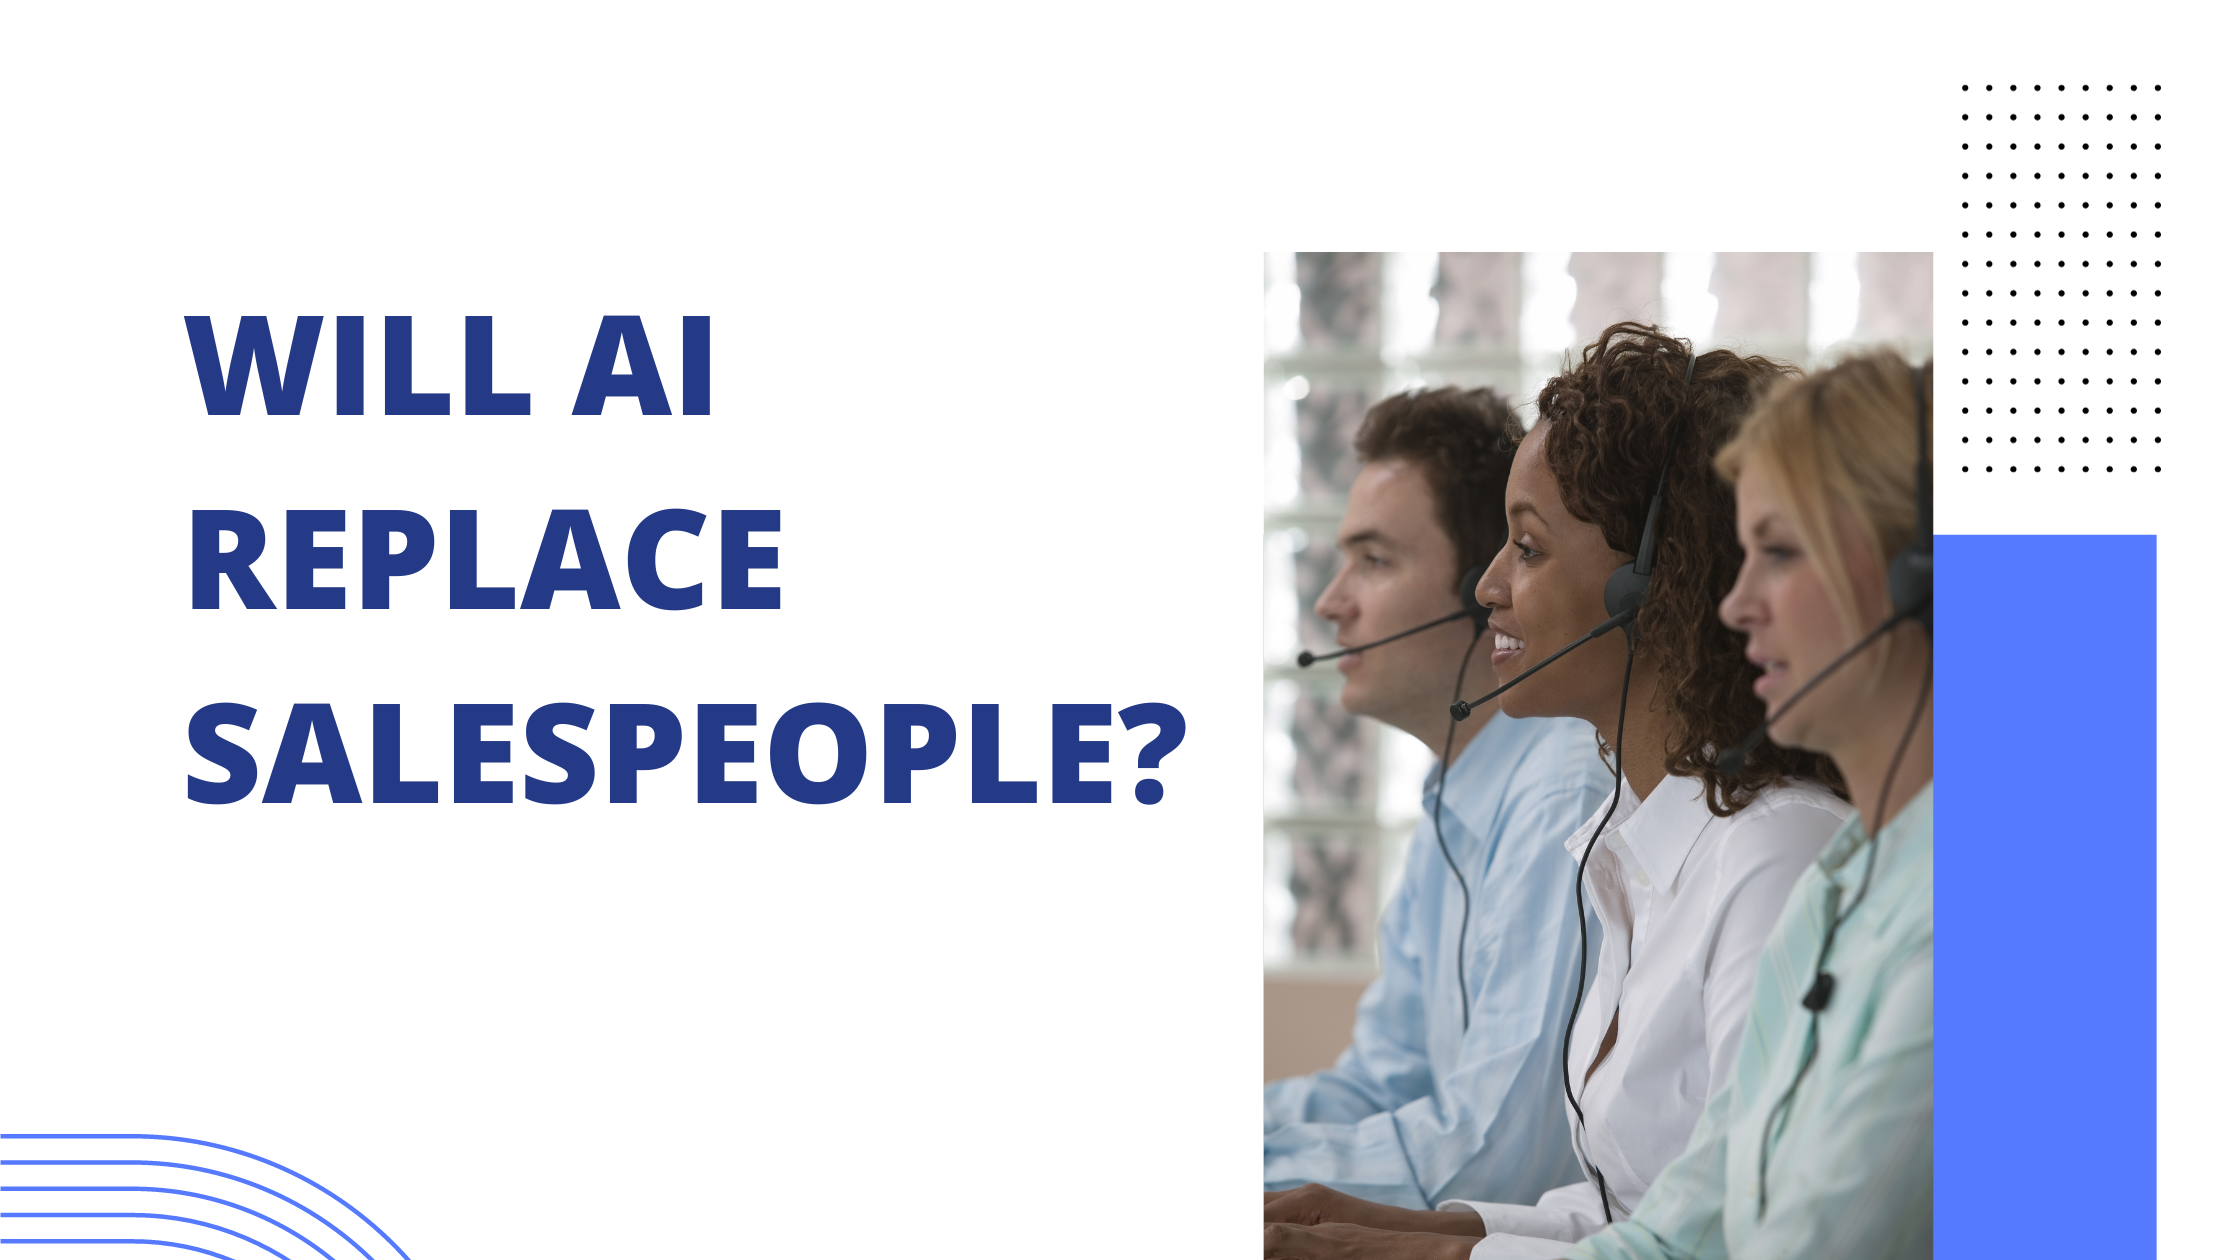 Will ai replace salespeople?